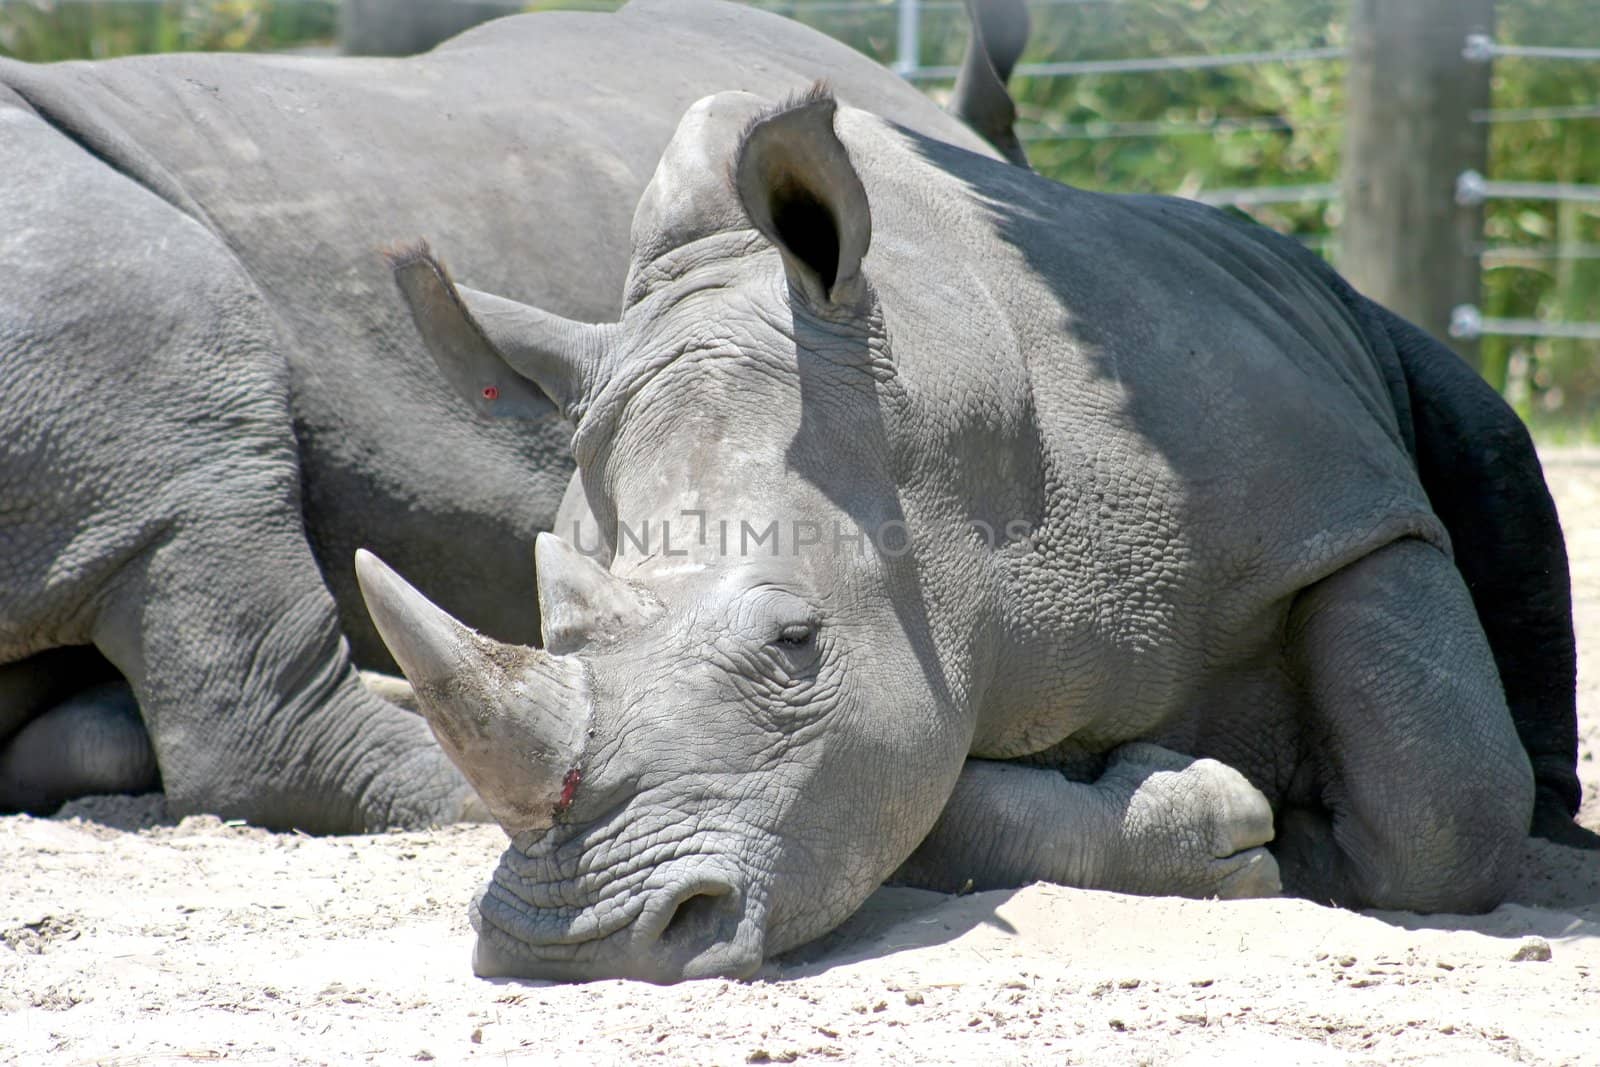 A Rhino resting in the sand, another rhino behind